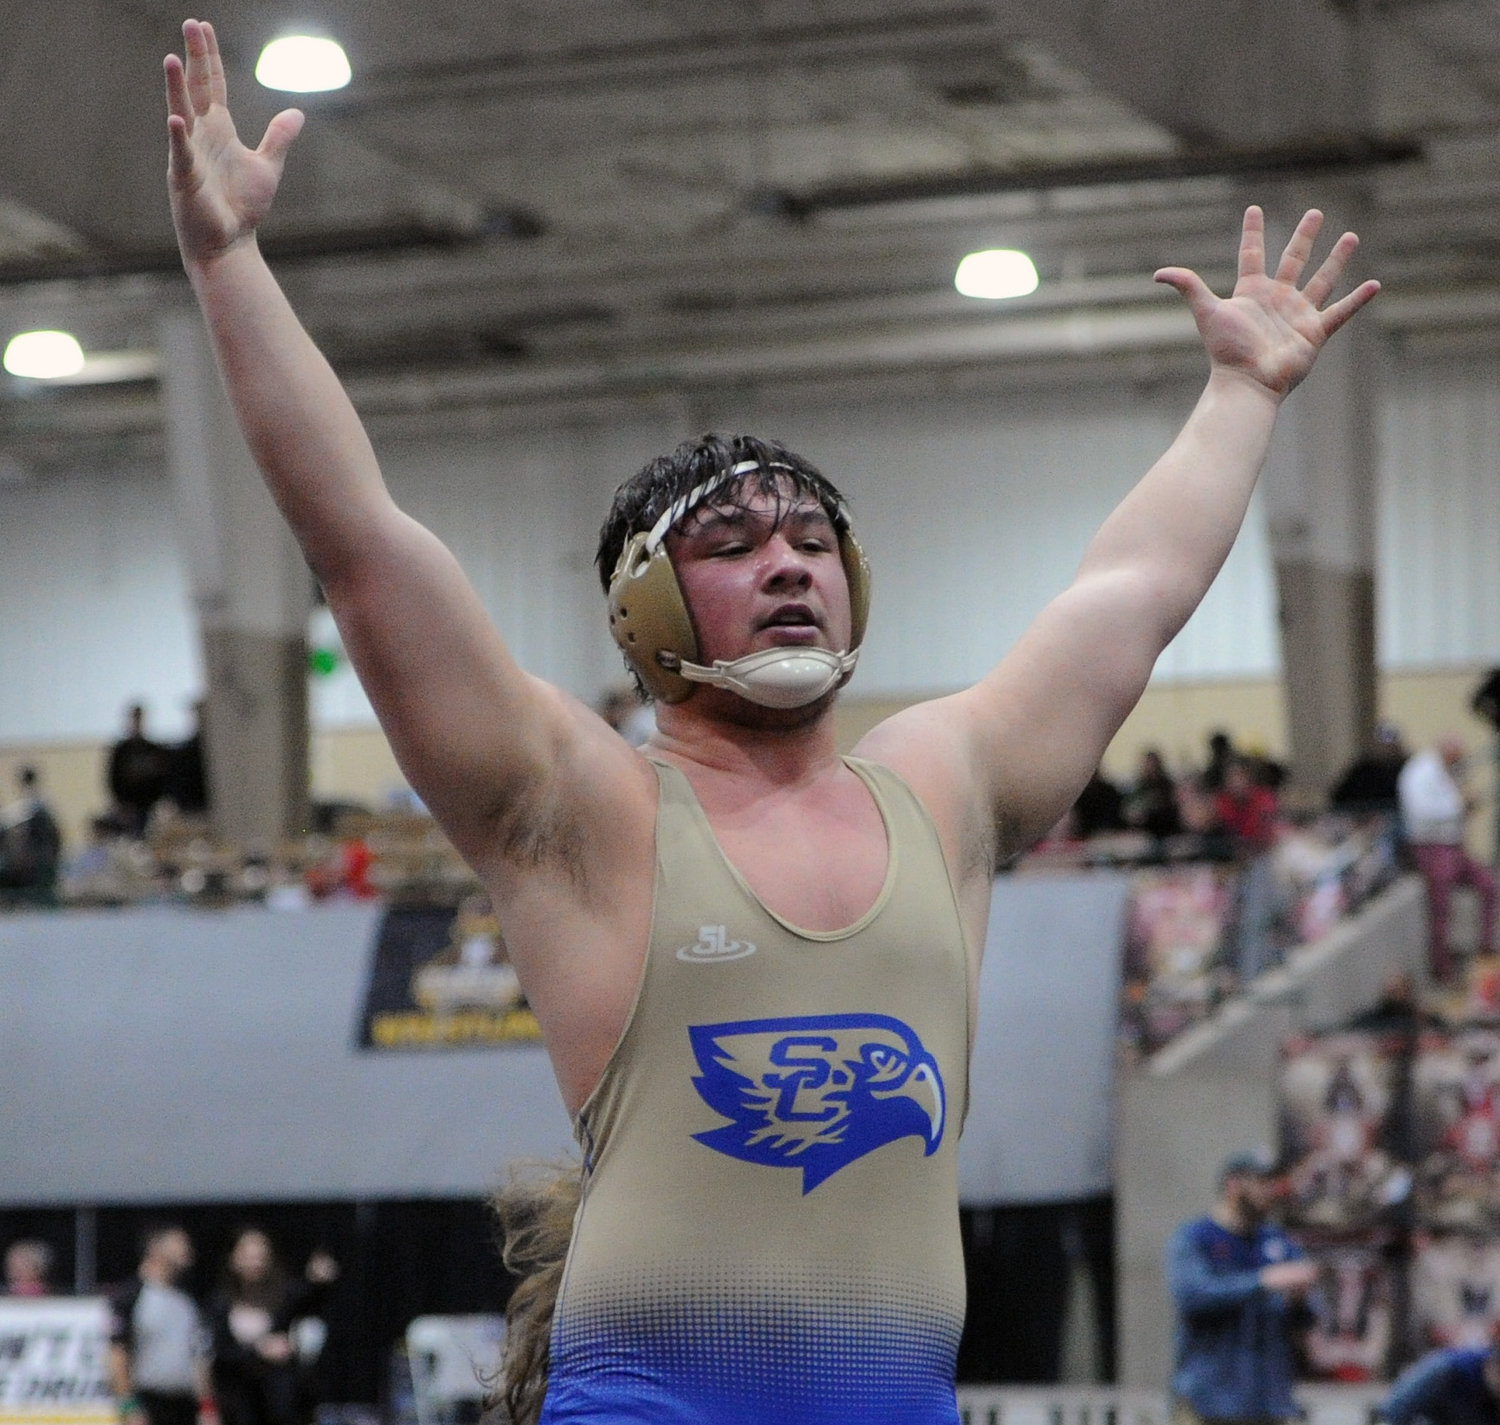 Logan McBee celebrates after he defeats Maryville’s Peyton Cooper in the Class 2A 220-pound weight class match for third place. He won the match in a 5-2 decision.